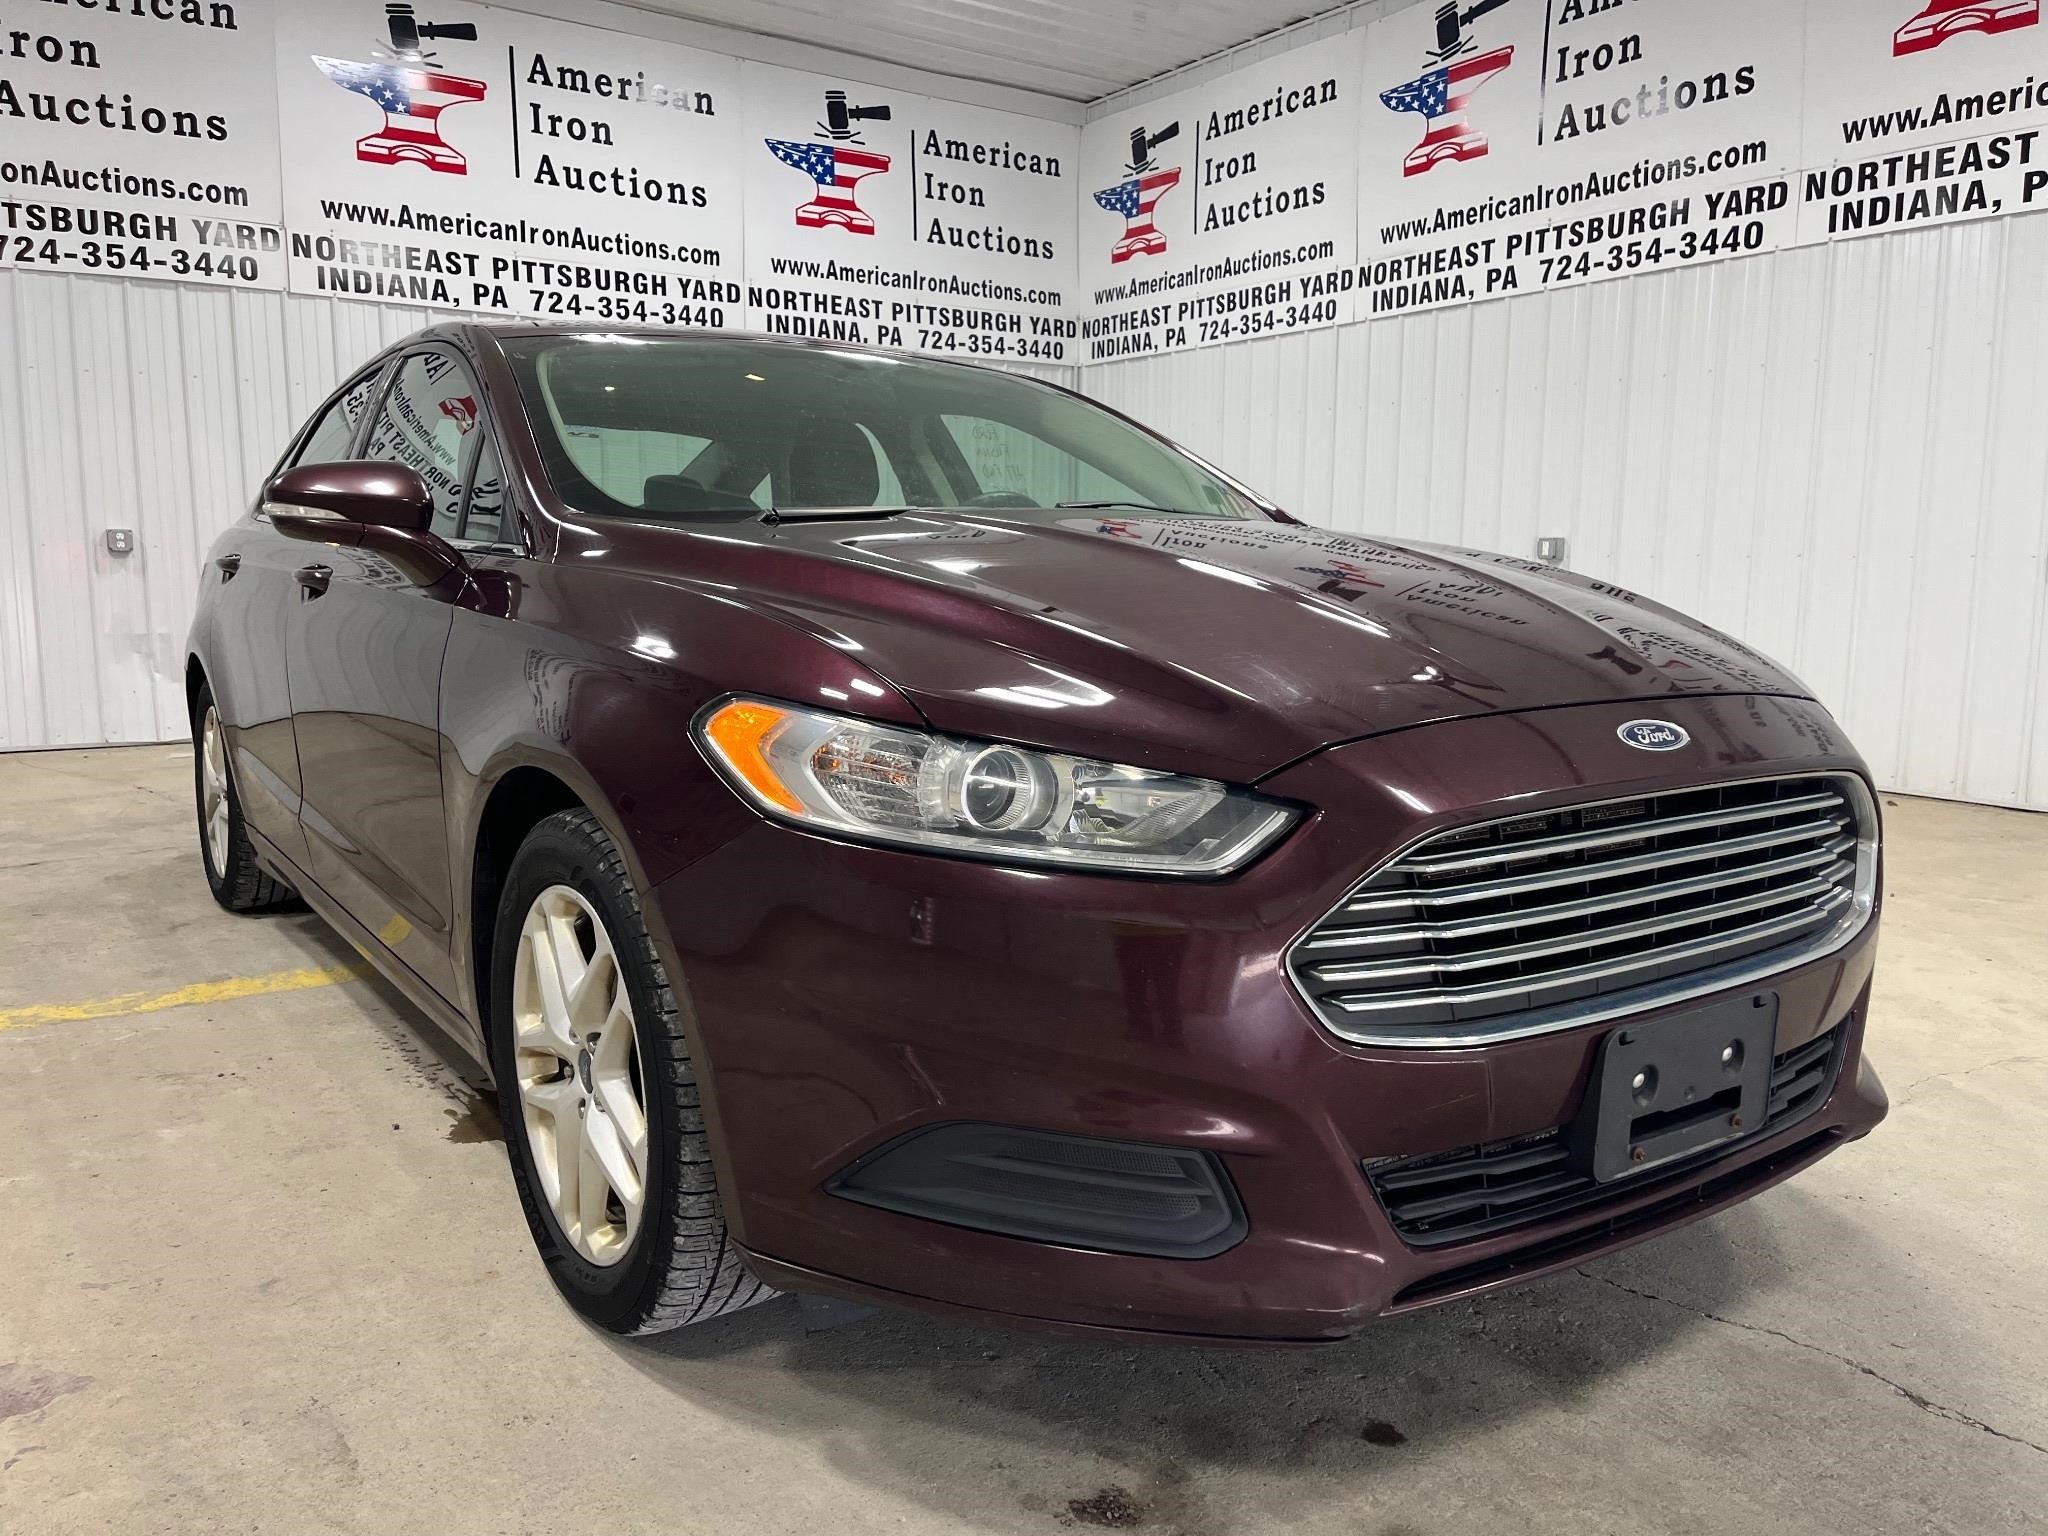 2013 Ford Fusion SE - Titled - NO RESERVE